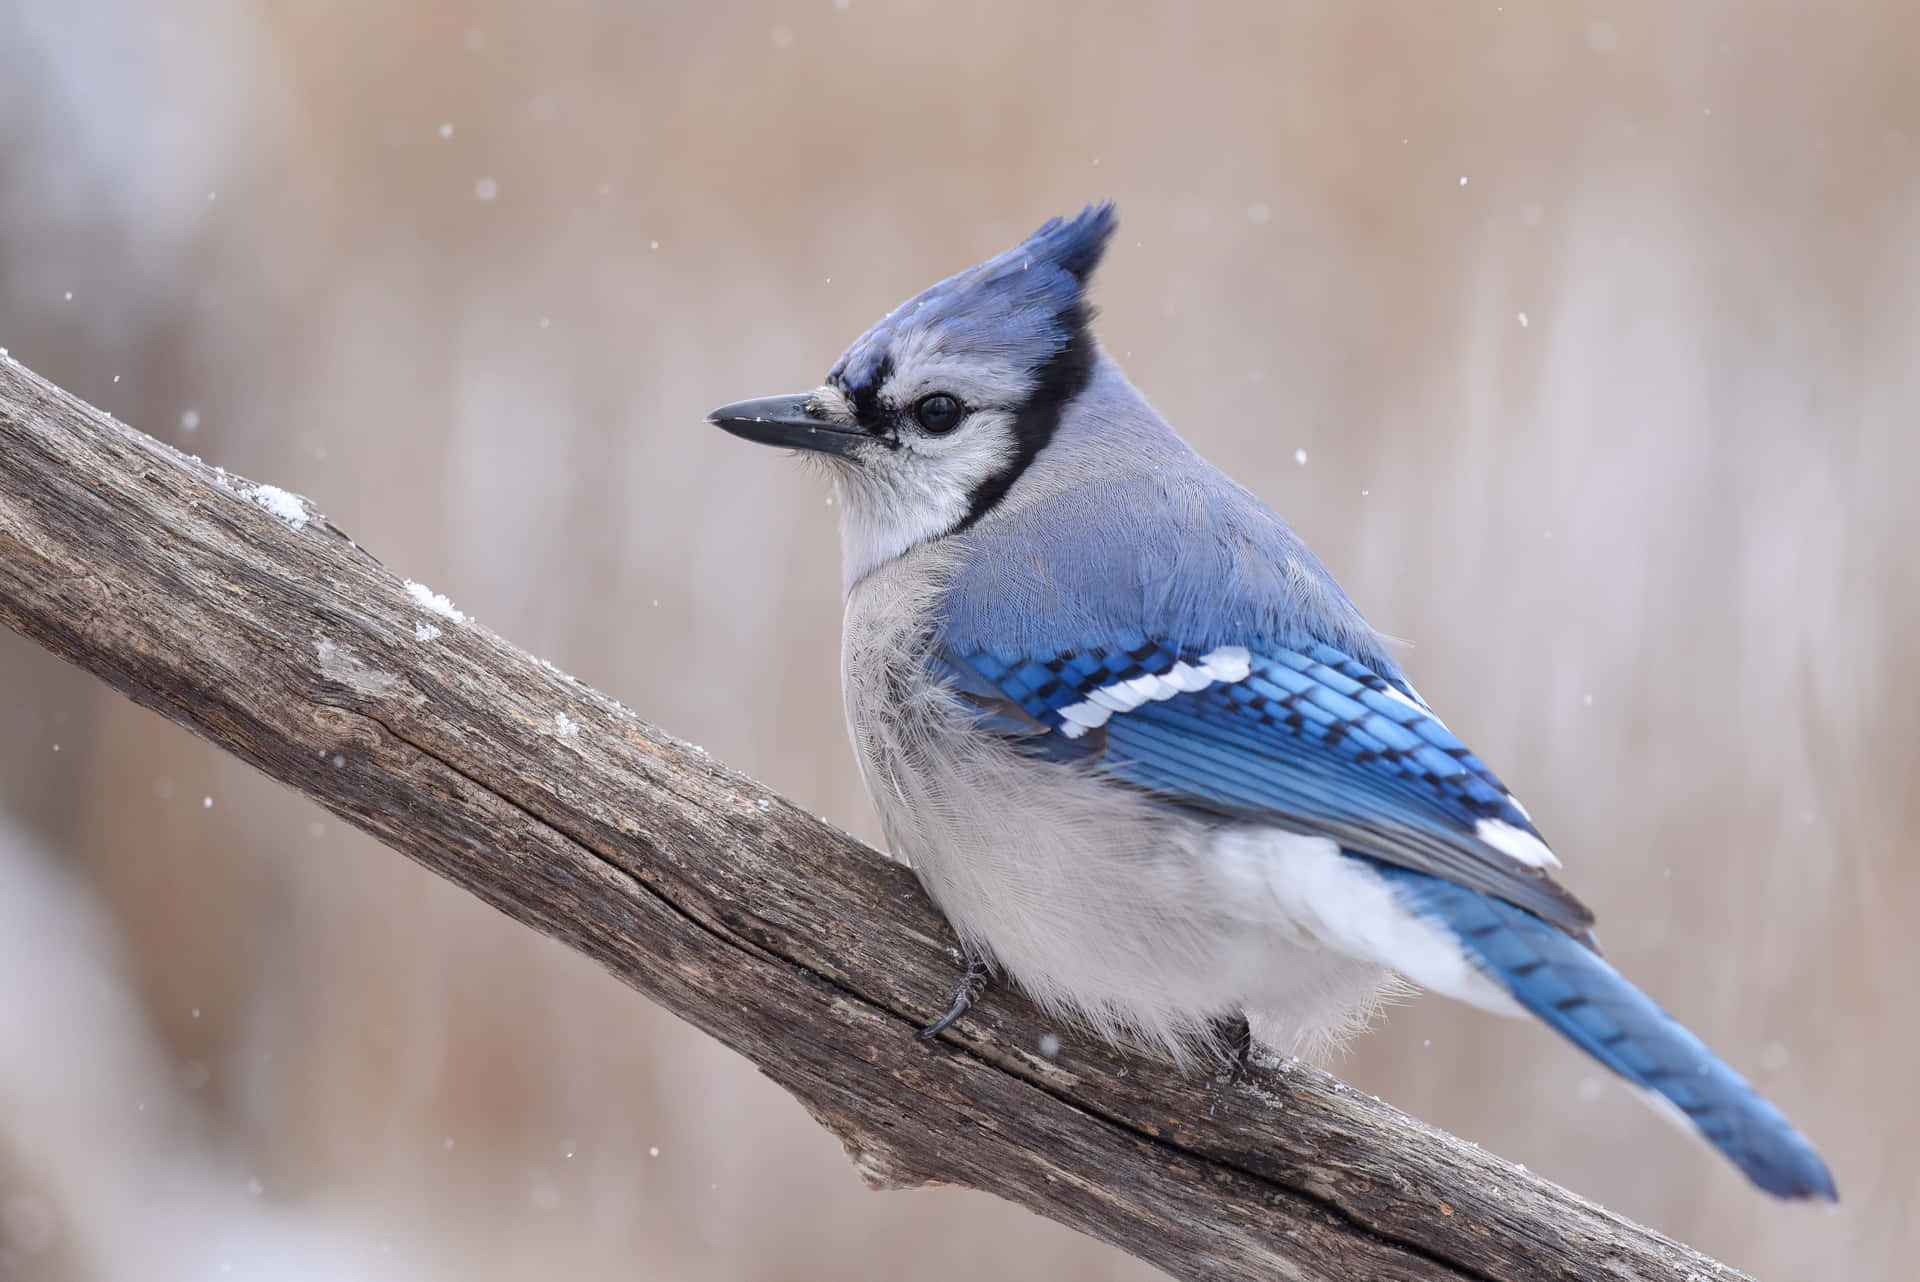 A beautiful Blue Jay perched on a wooden fence